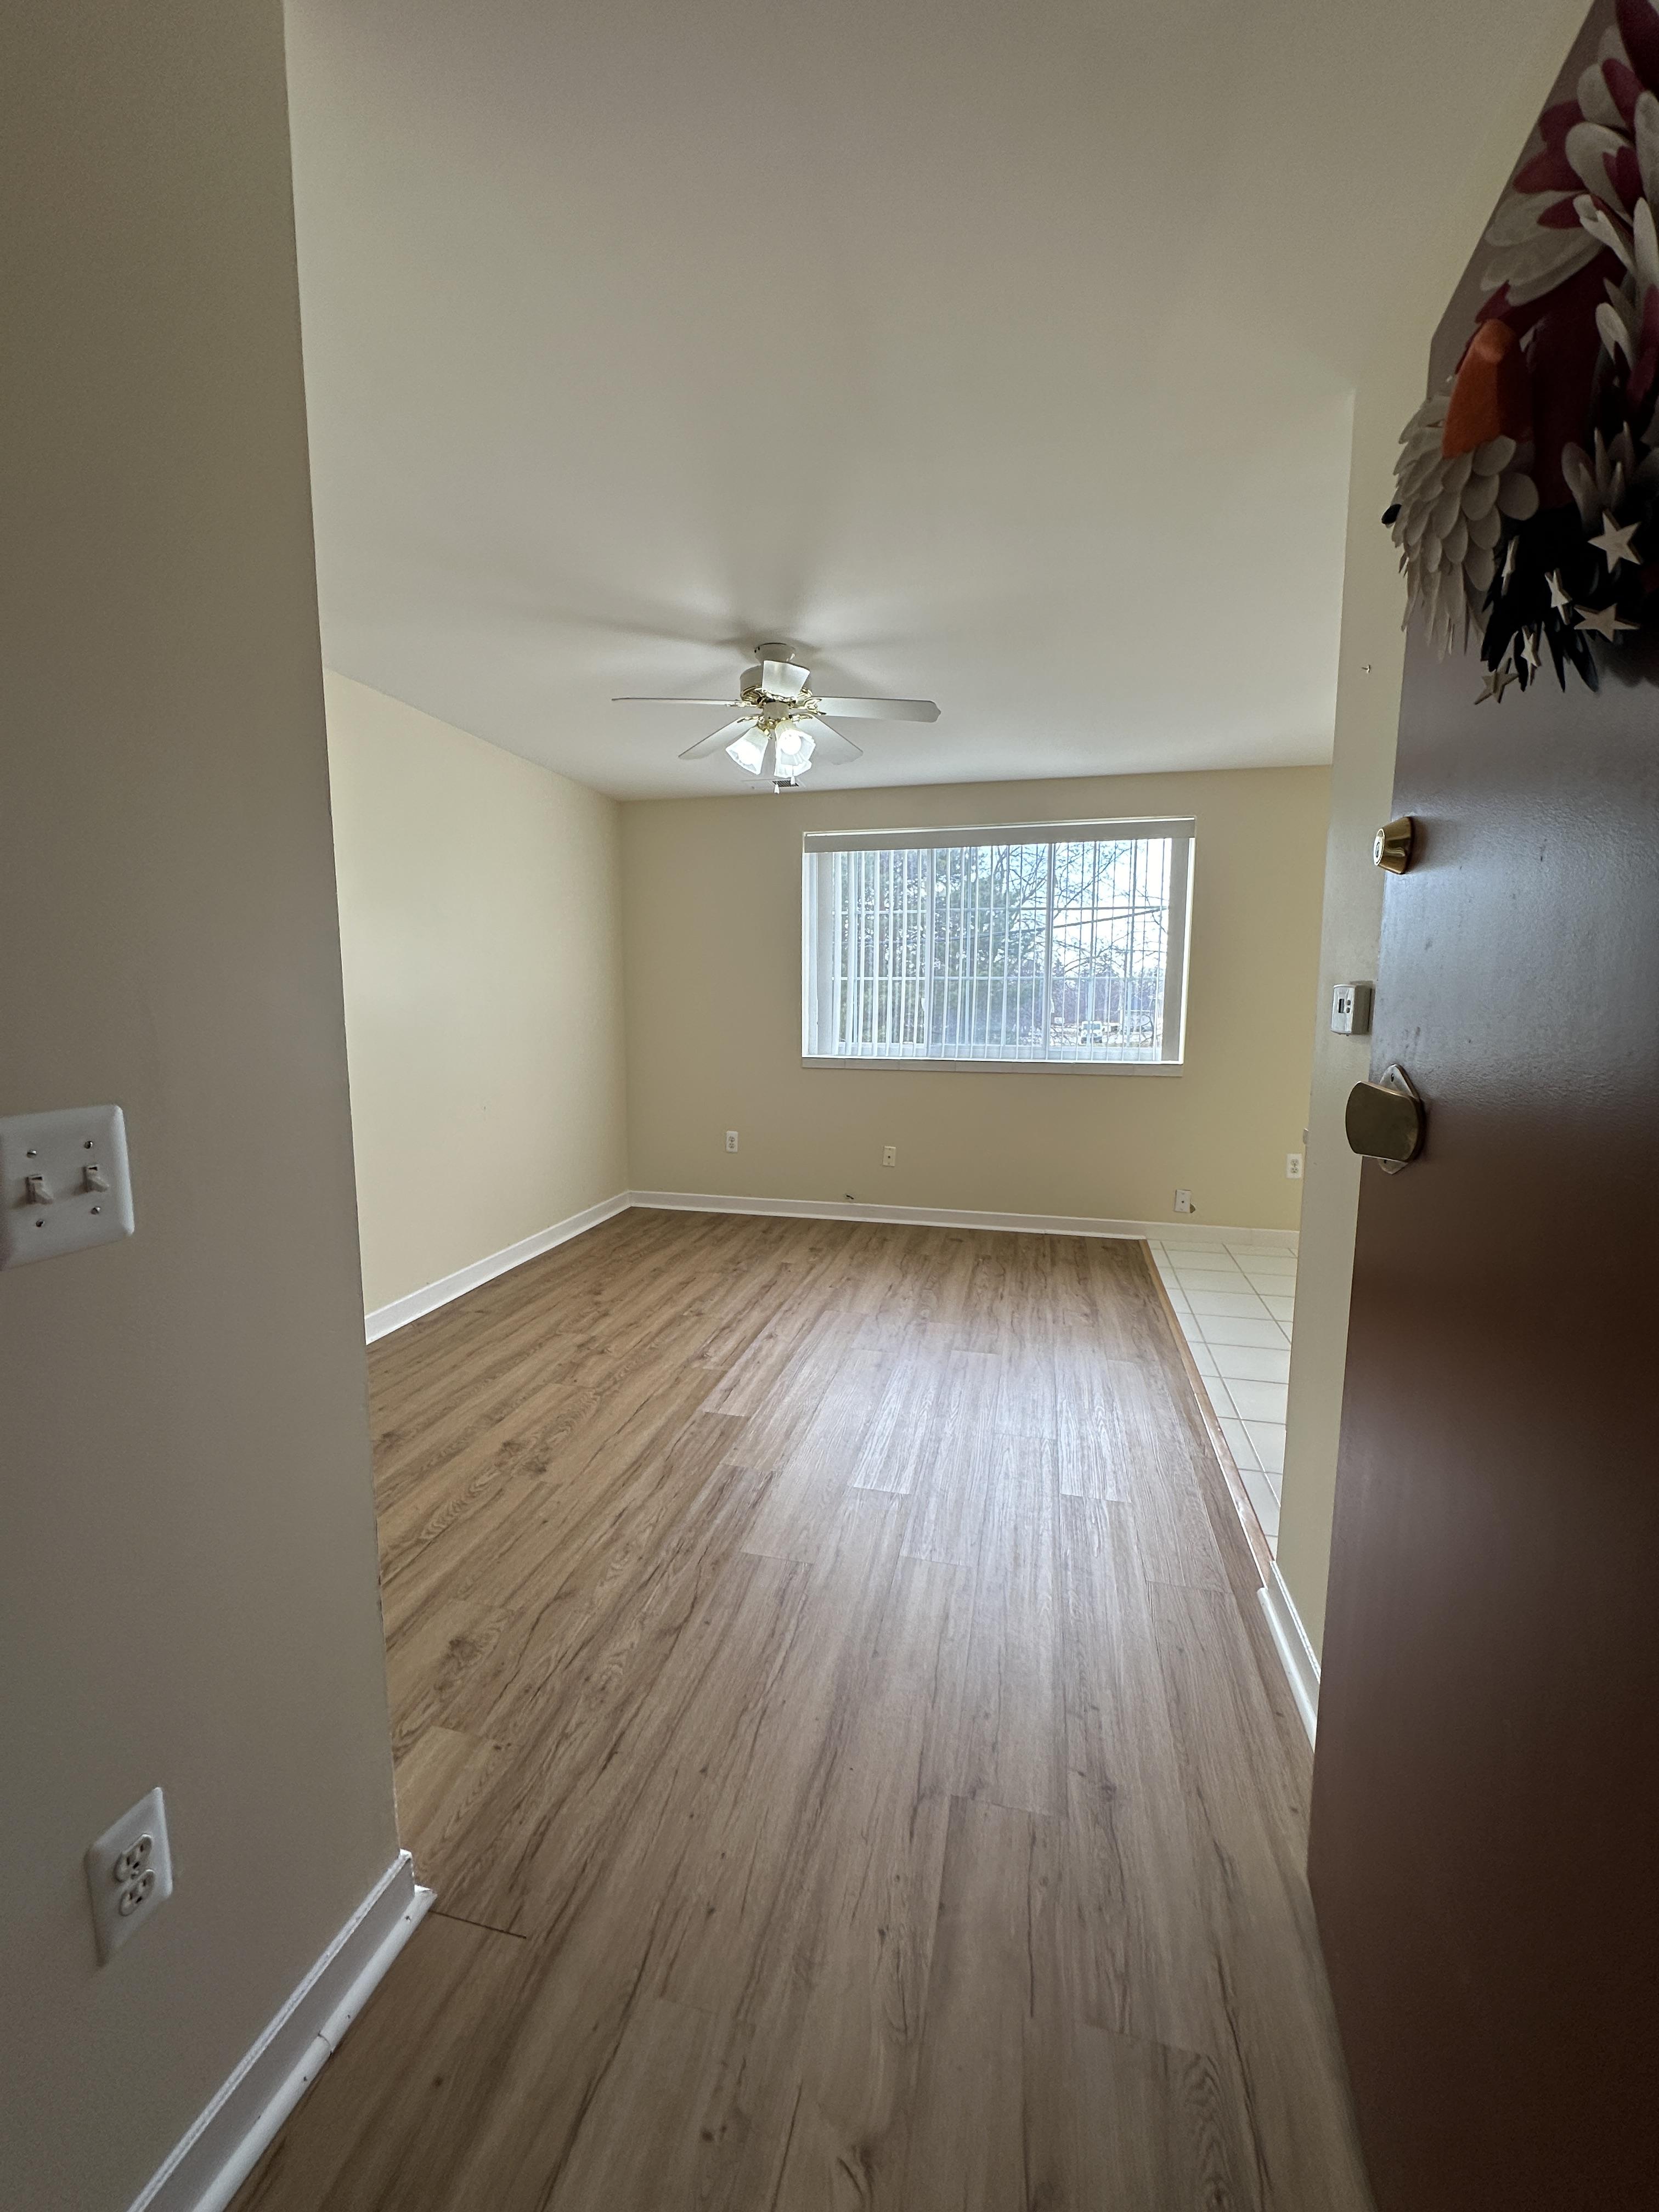 420, Yale, Michigan 48097, 1 Bedroom Bedrooms, ,1 BathroomBathrooms,Apartment,Yale Manor Apartment Community ,420,1,1835